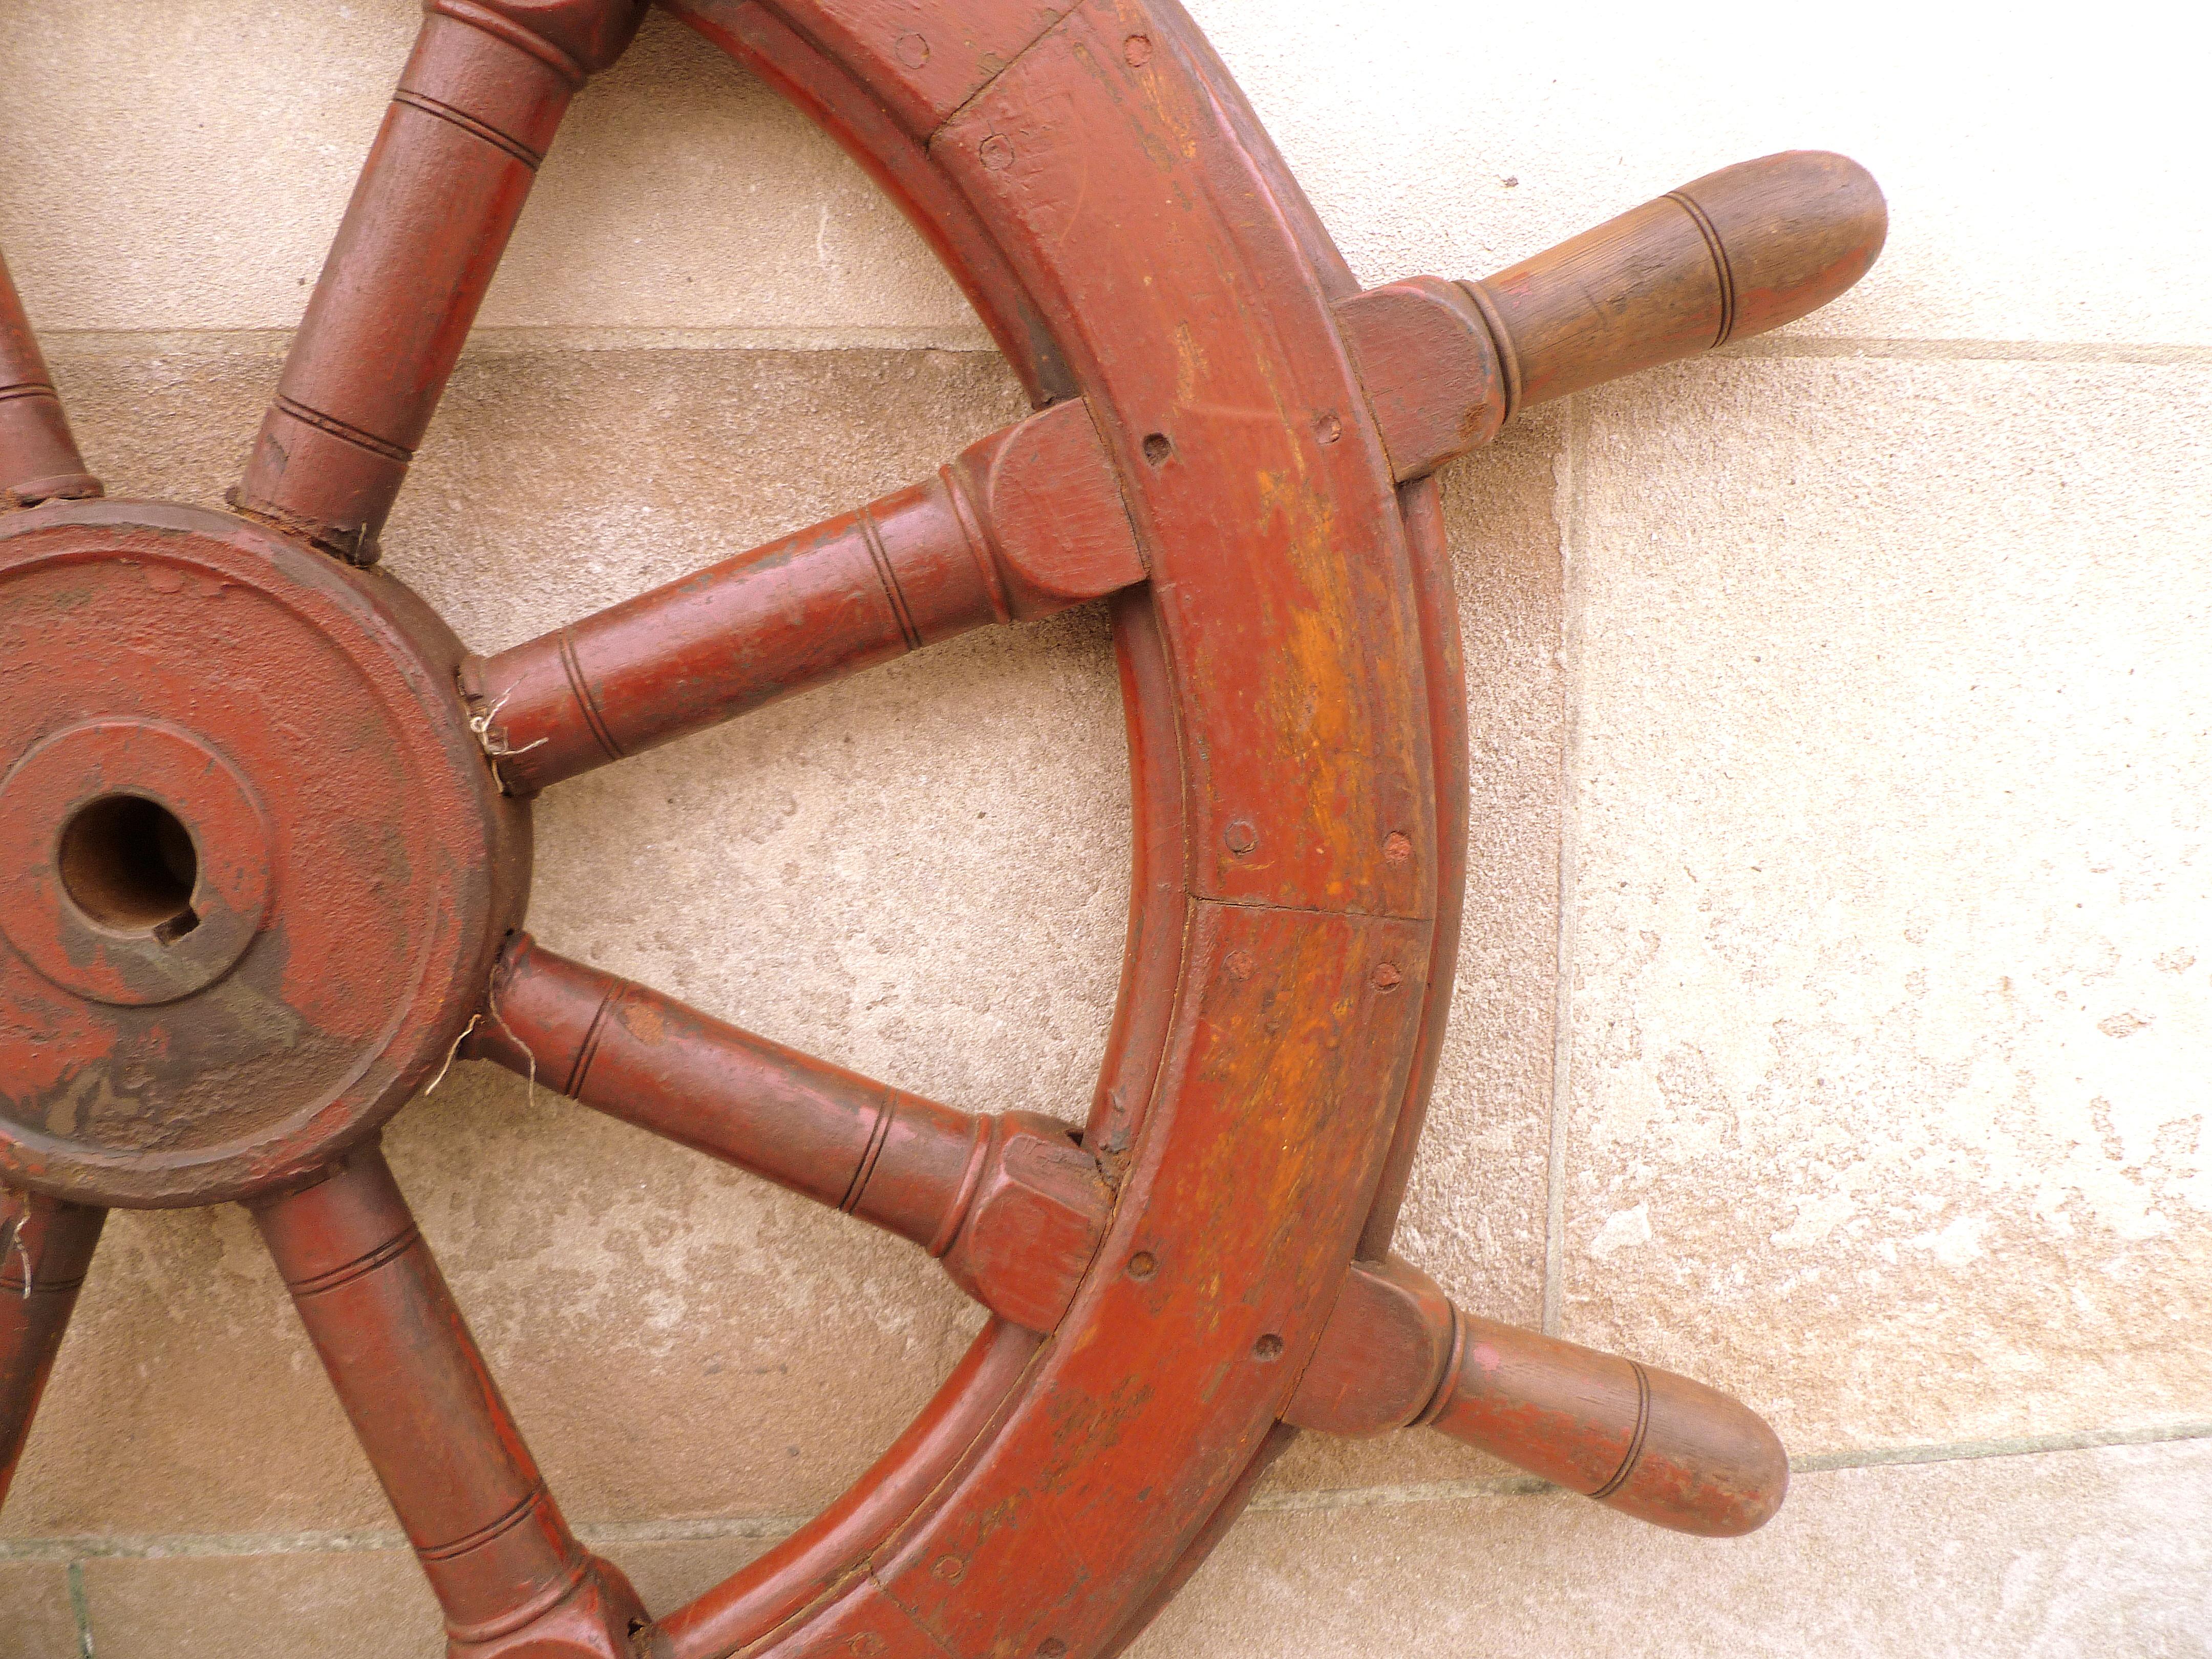 Hand-Crafted Antique Ship Vessel Handle Wheel For Sale